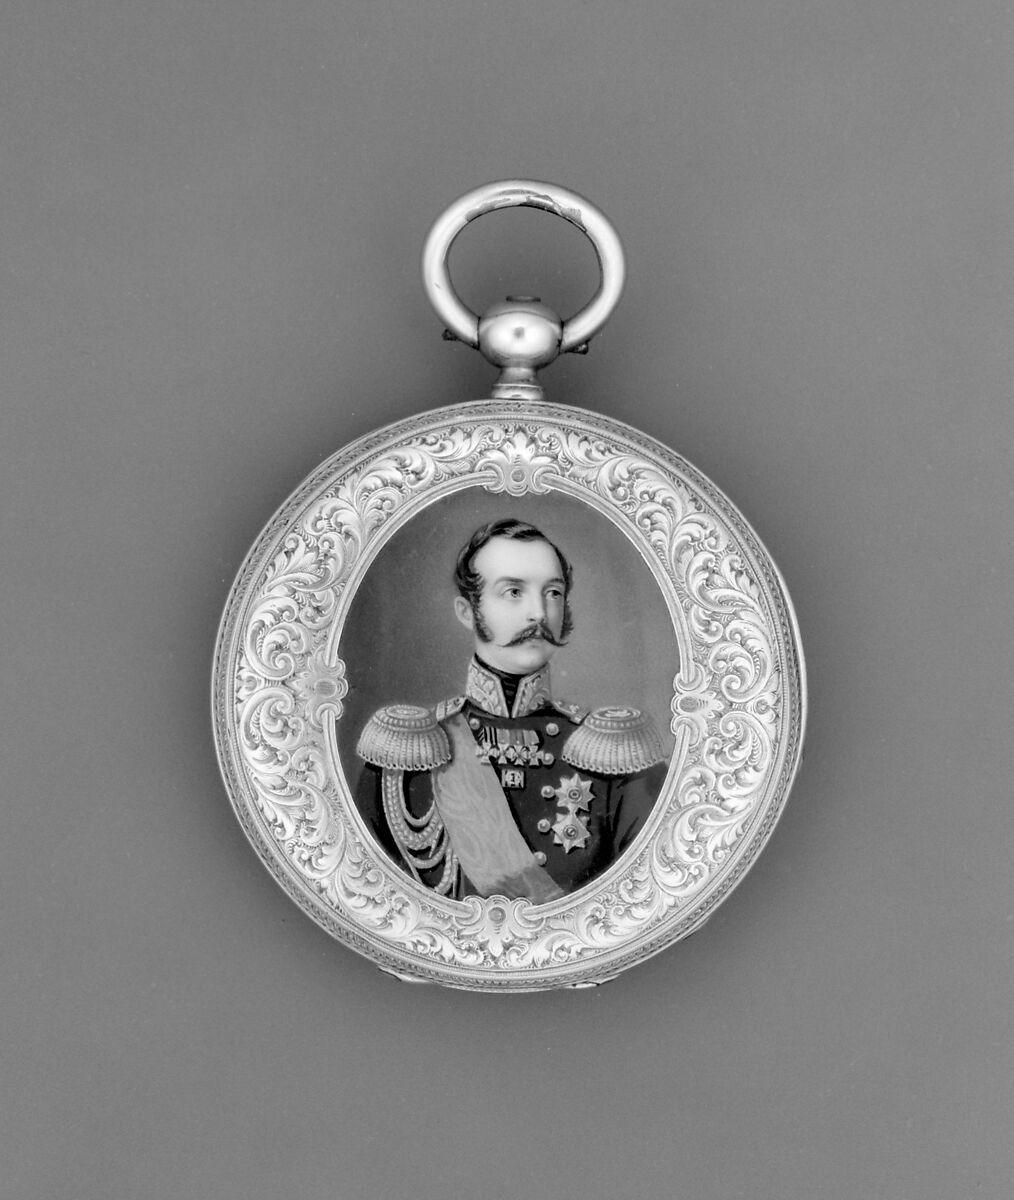 Watch with a portrait of Alexander II, czar of Russia (r. 1855–81), Watchmaker: H. Maret, Case of gold and enamel; jeweled movement, with temperature-compensated balance and Swiss lever escapement, Swiss, Geneva 